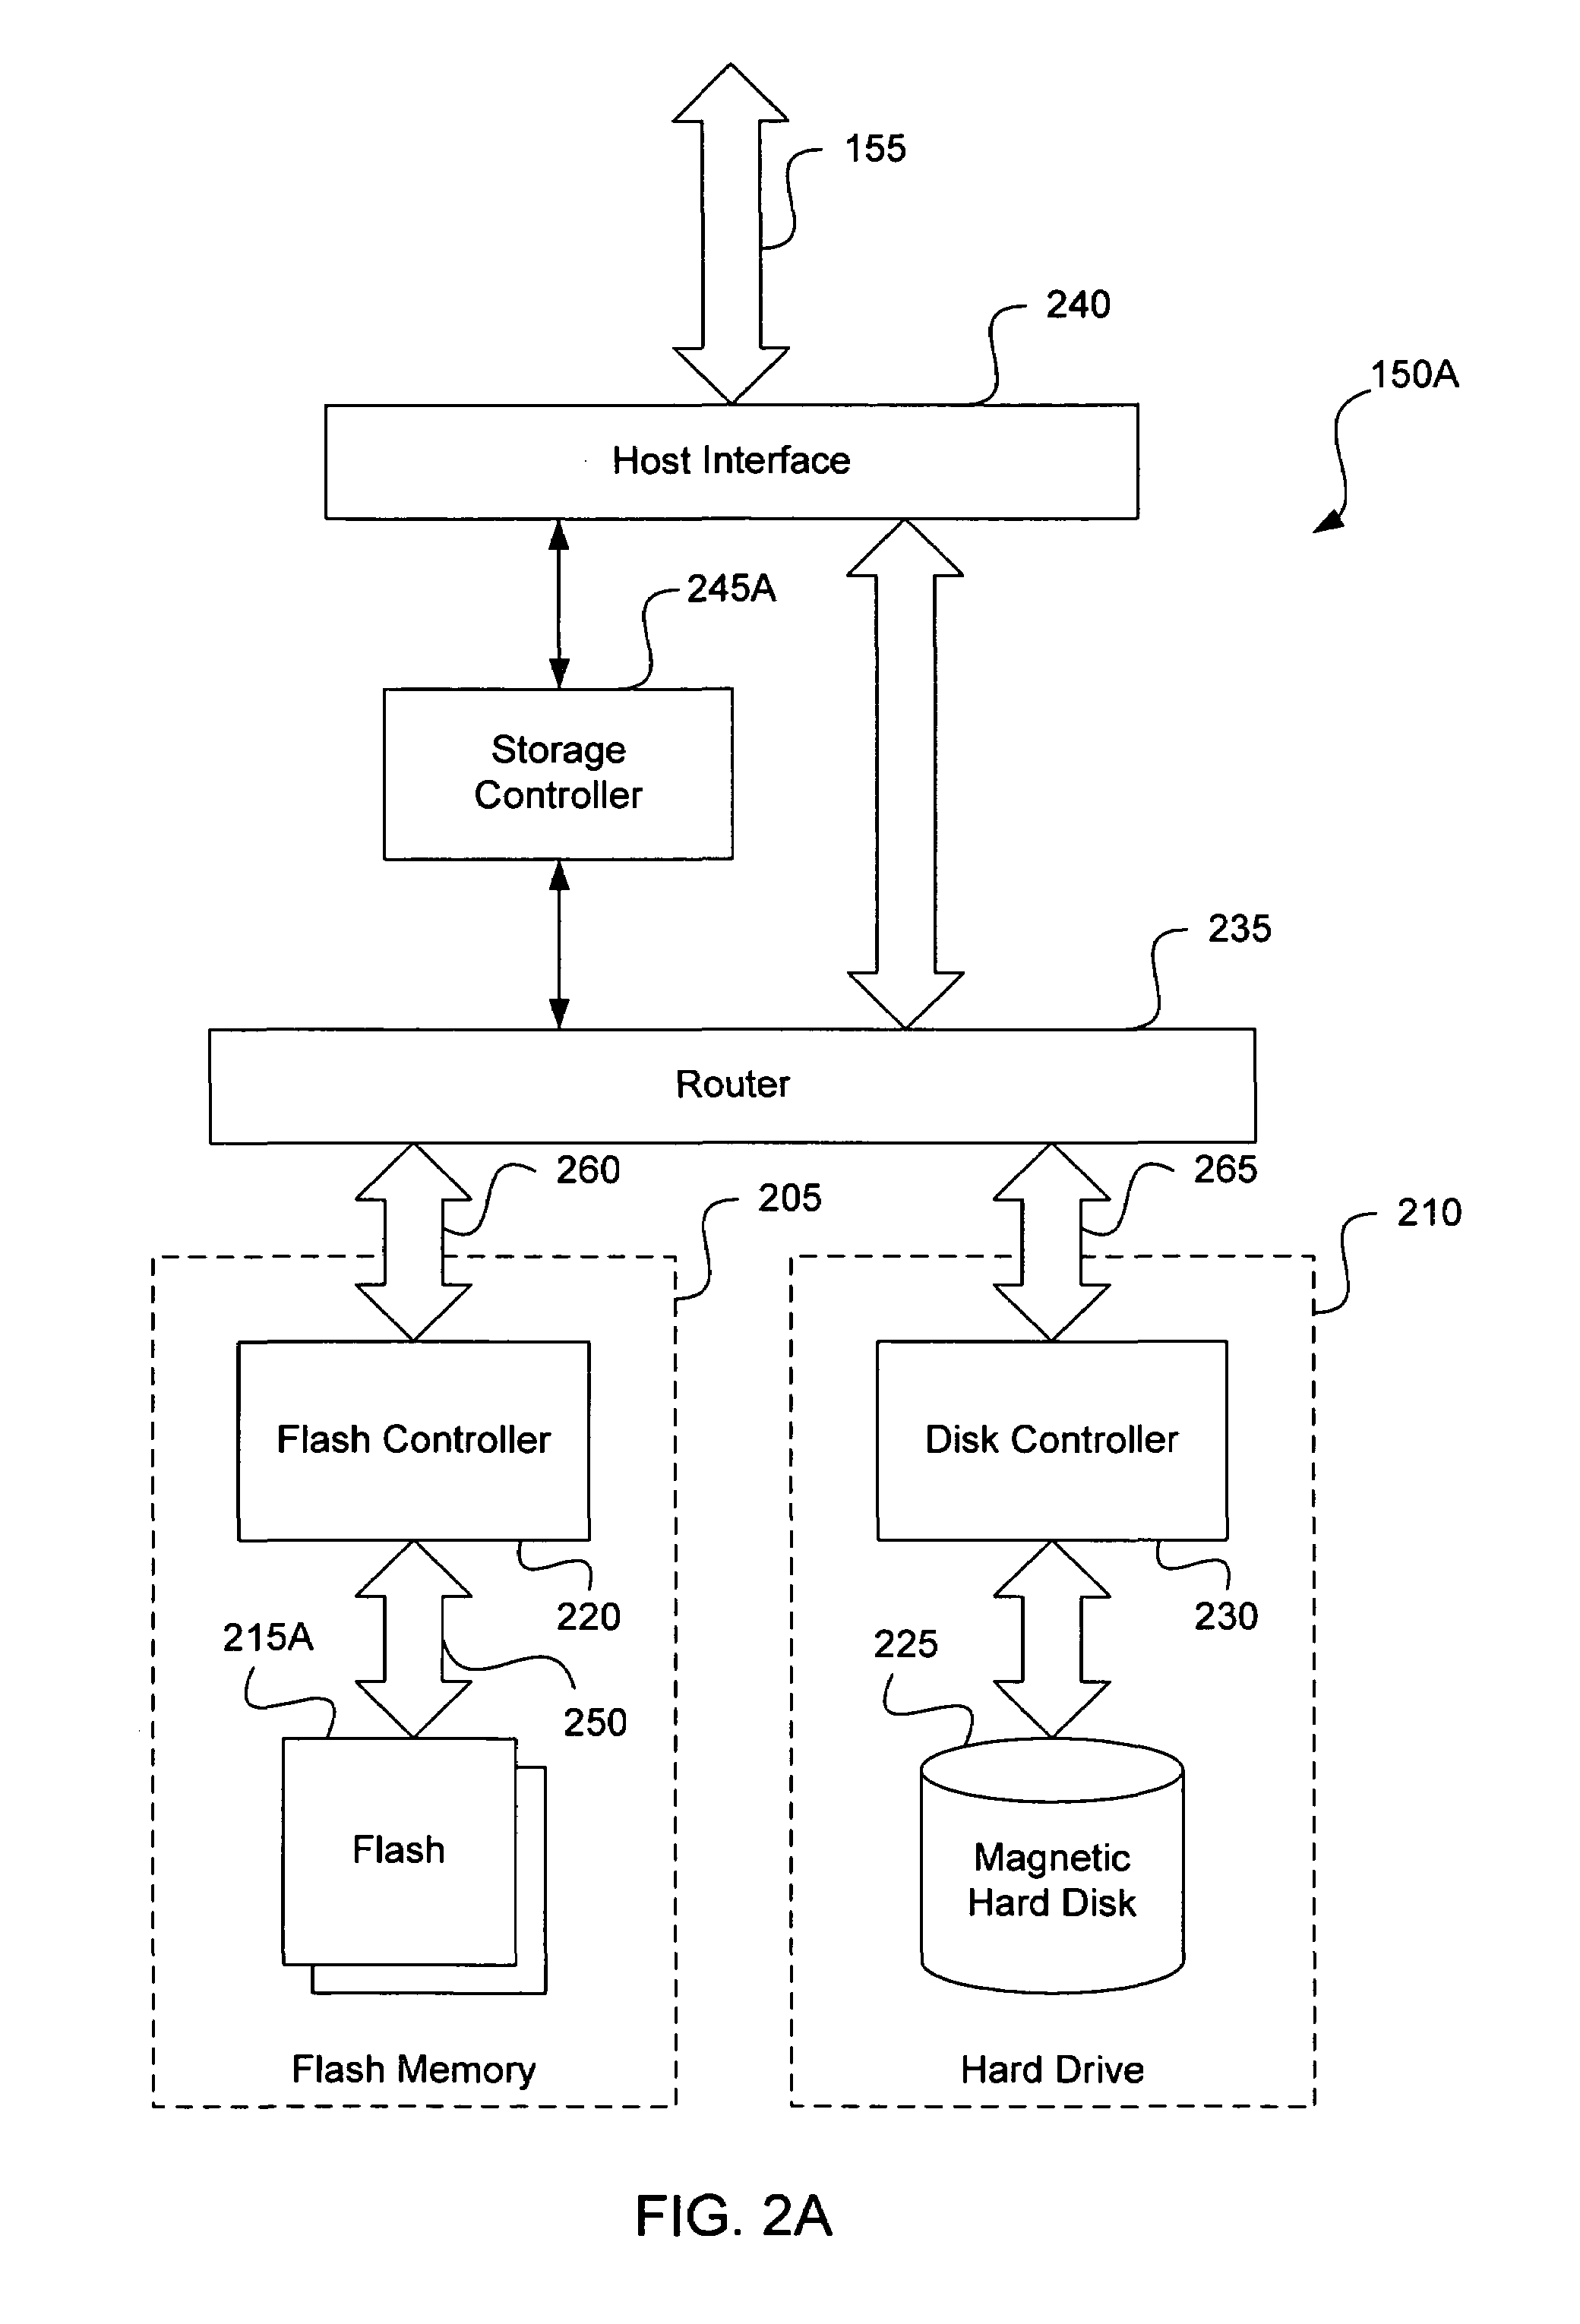 Disk acceleration using first and second storage devices